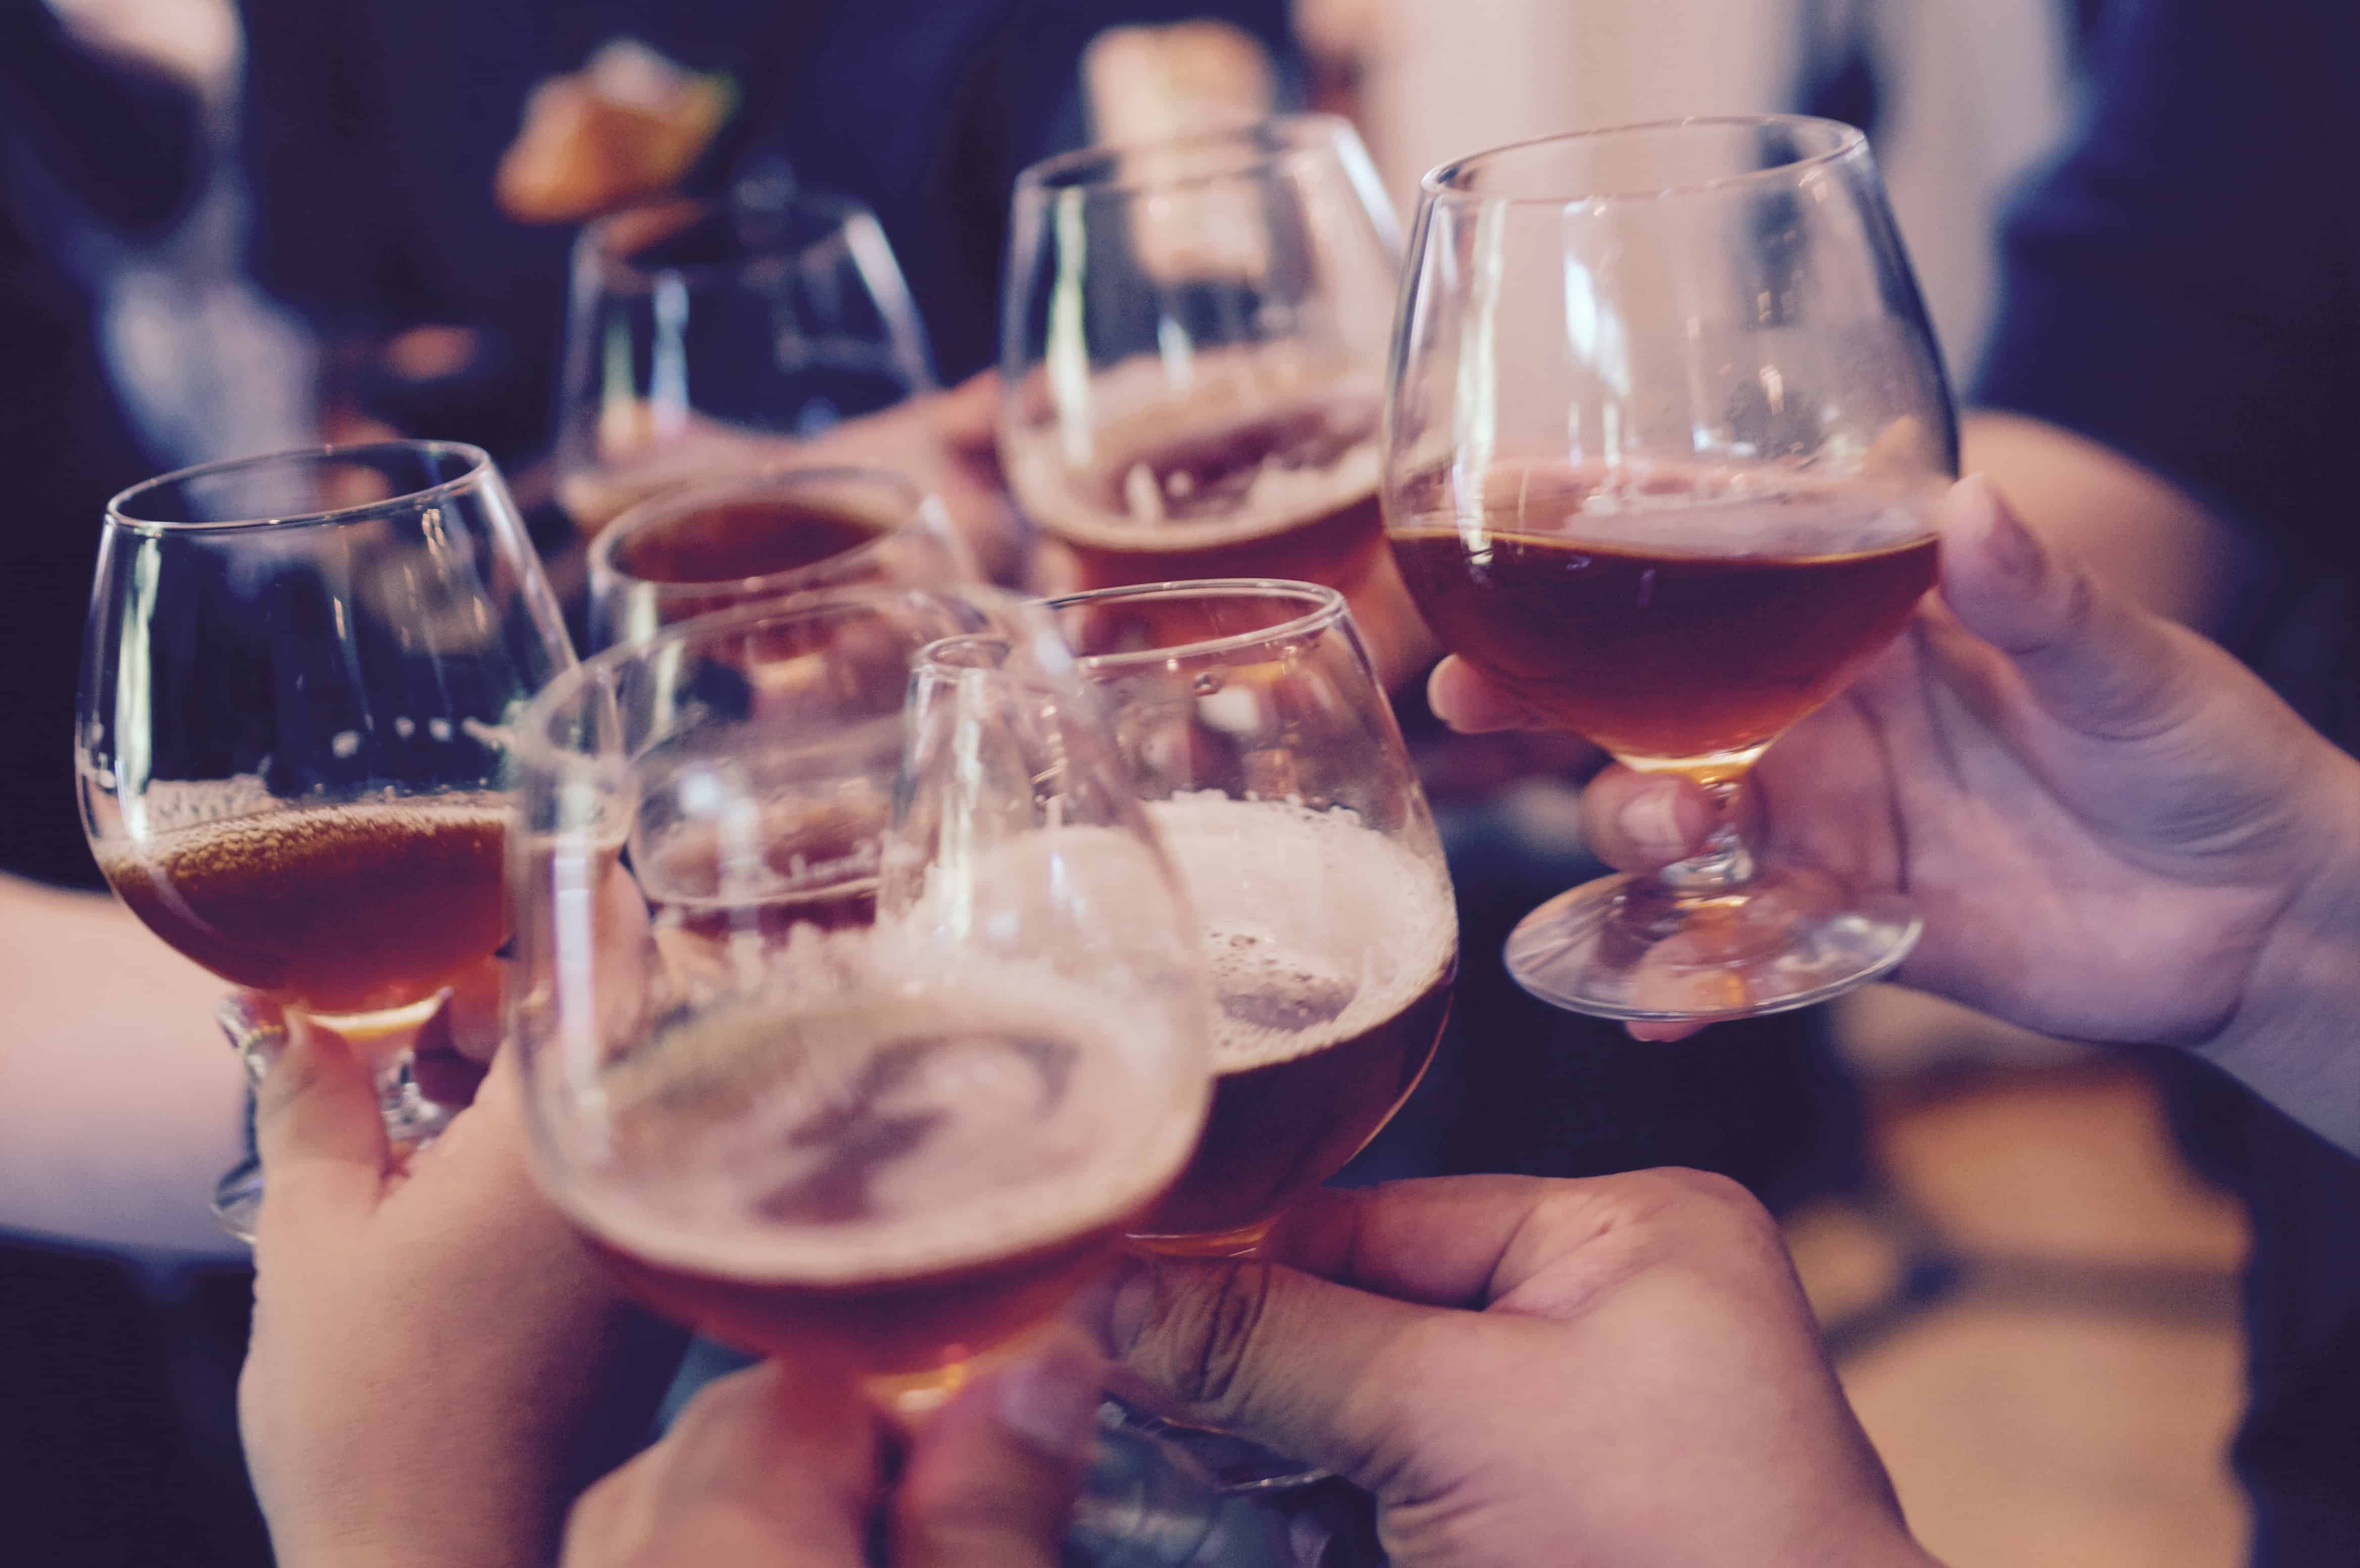 How does alcohol work in the body? Read these 15 interesting facts about alcohol to learn how it is absorbed and processed, how strong is a drink, how much is too much alcohol and when it becomes dangerous, and how long is alcohol in your system.